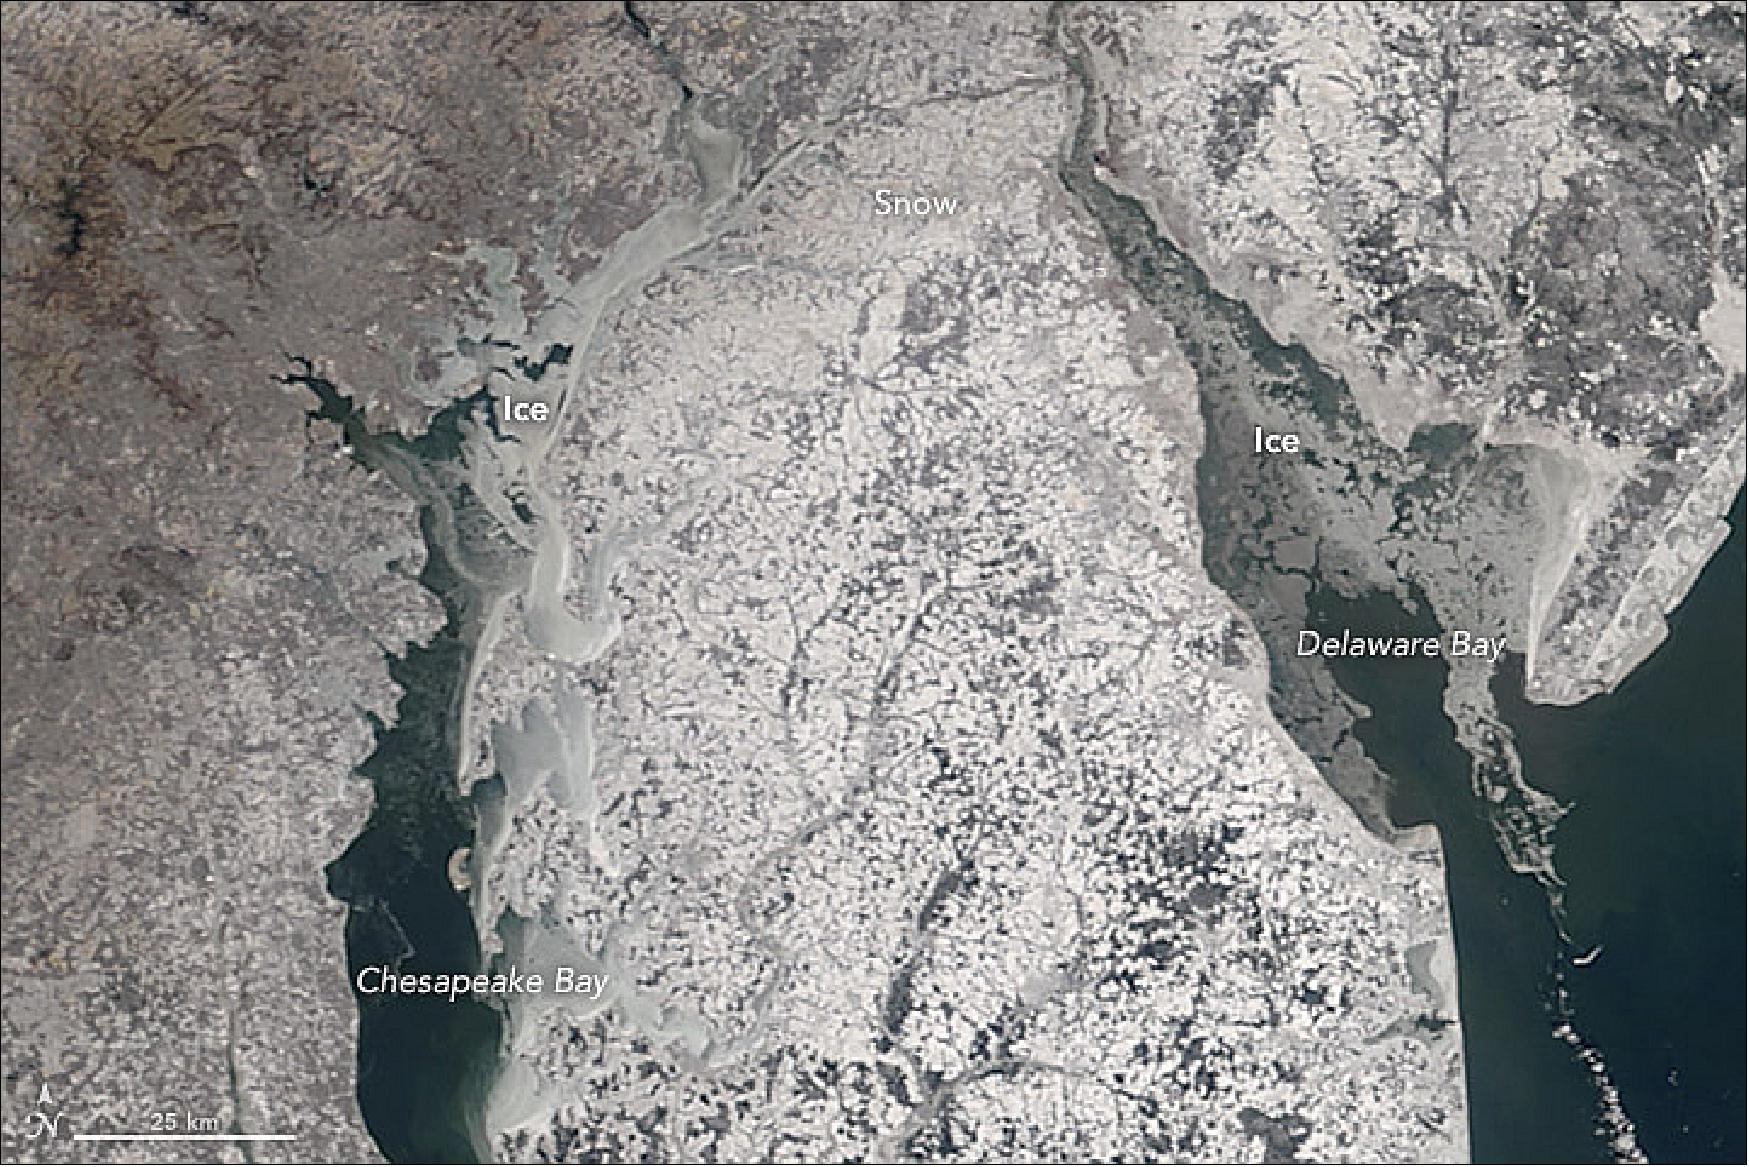 Figure 43: MODIS image of Delaware Bay—between New Jersey, Pennsylvania, and Delaware acquired on 7 Jan. 2018 (image credit: NASA image by Jeff Schmaltz, LANCE/EOSDIS Rapid Response. Image cropping and caption by Adam Voiland)